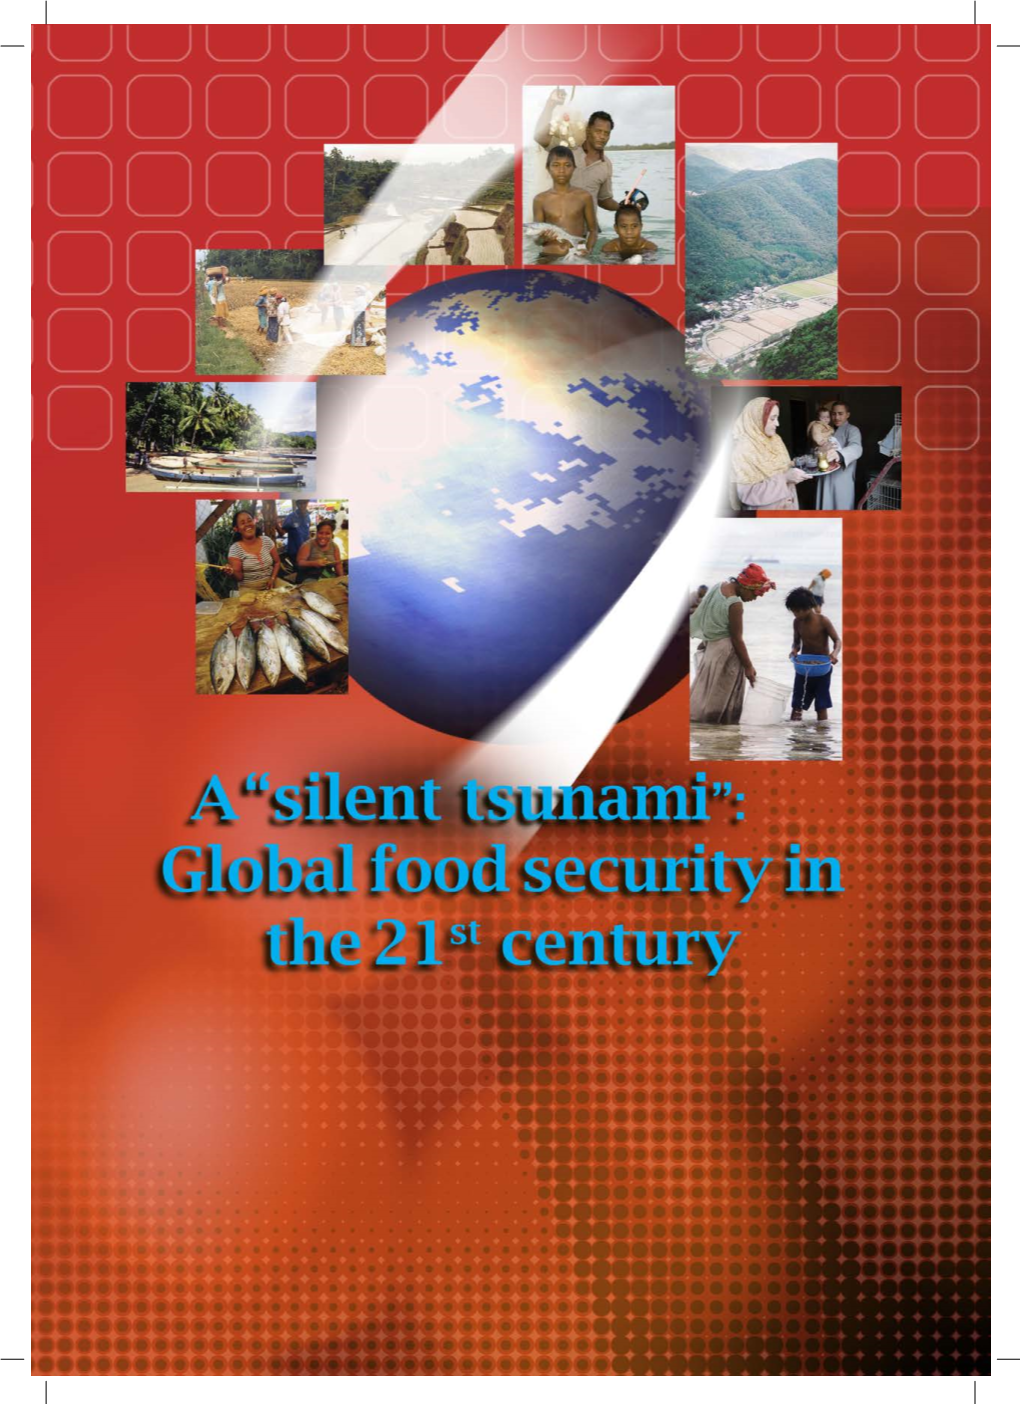 Global Food Security – What Is the Issue? 1 a ”Silent Tsunami”: Global Food Security in the 21St Century